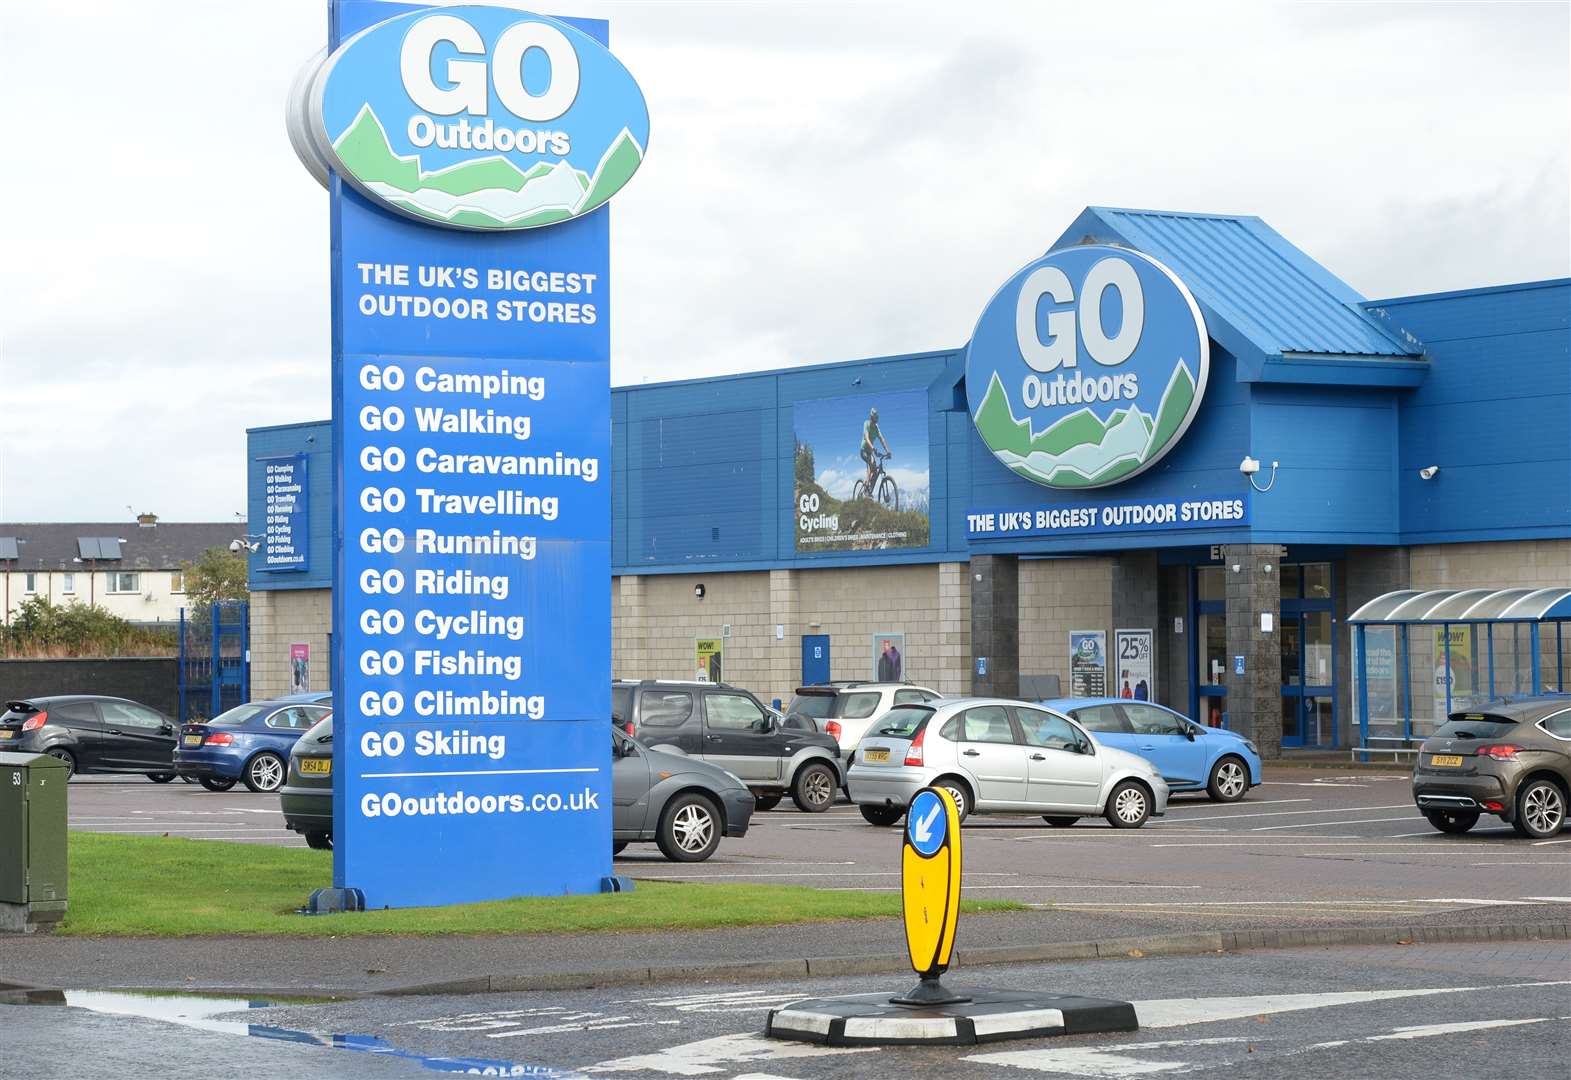 Owners of Go Outdoors, which has a branch in Inverness, say they are  preparing to call in administrators as coronavirus lockdown hits business